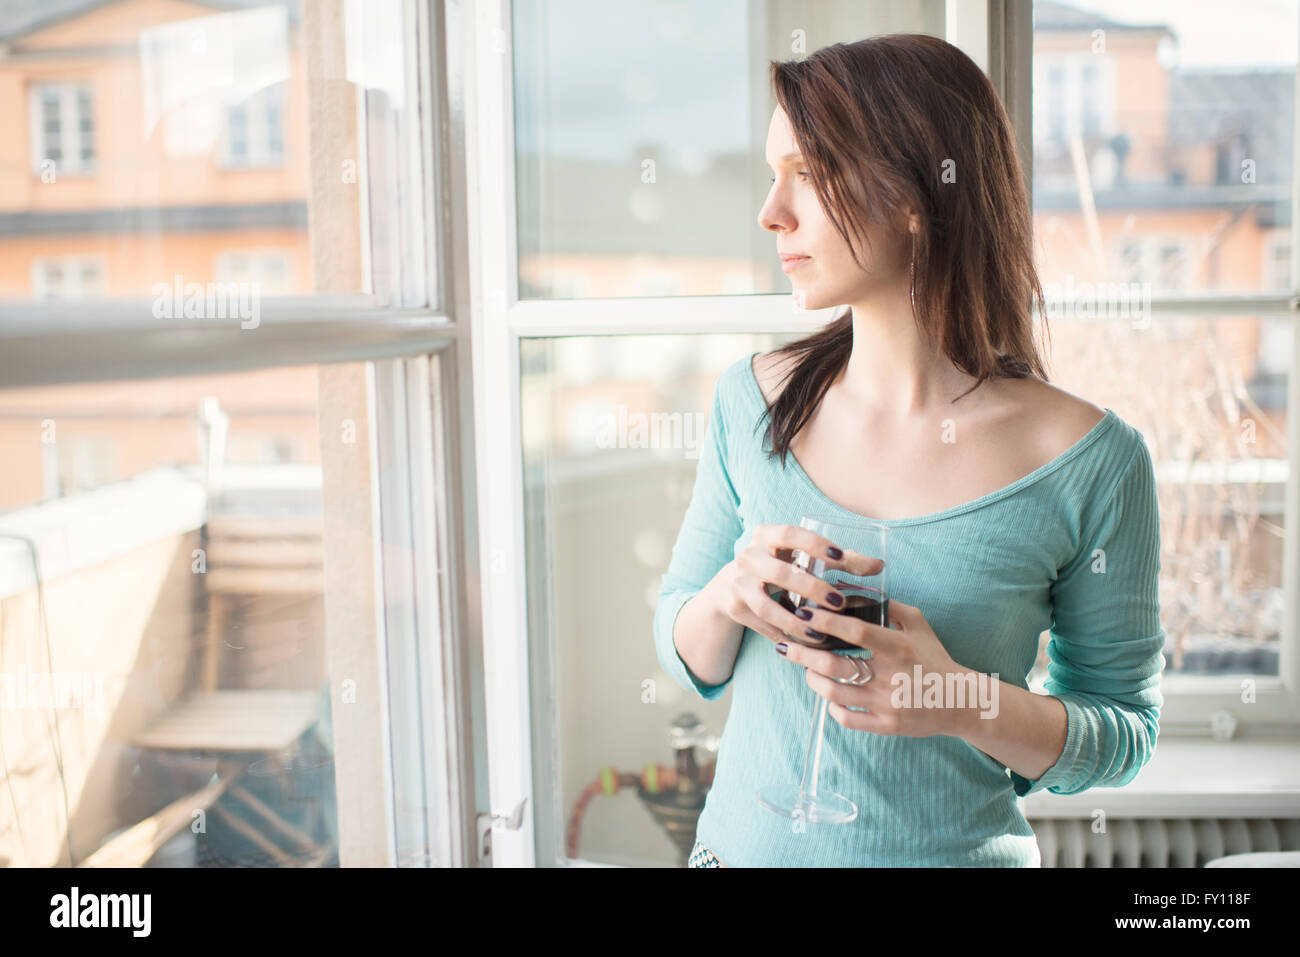 Woman standing by a window, looking away. Concept of sadness, waiting and anticipation. Lifestyle image of contemplation. Stock Photo